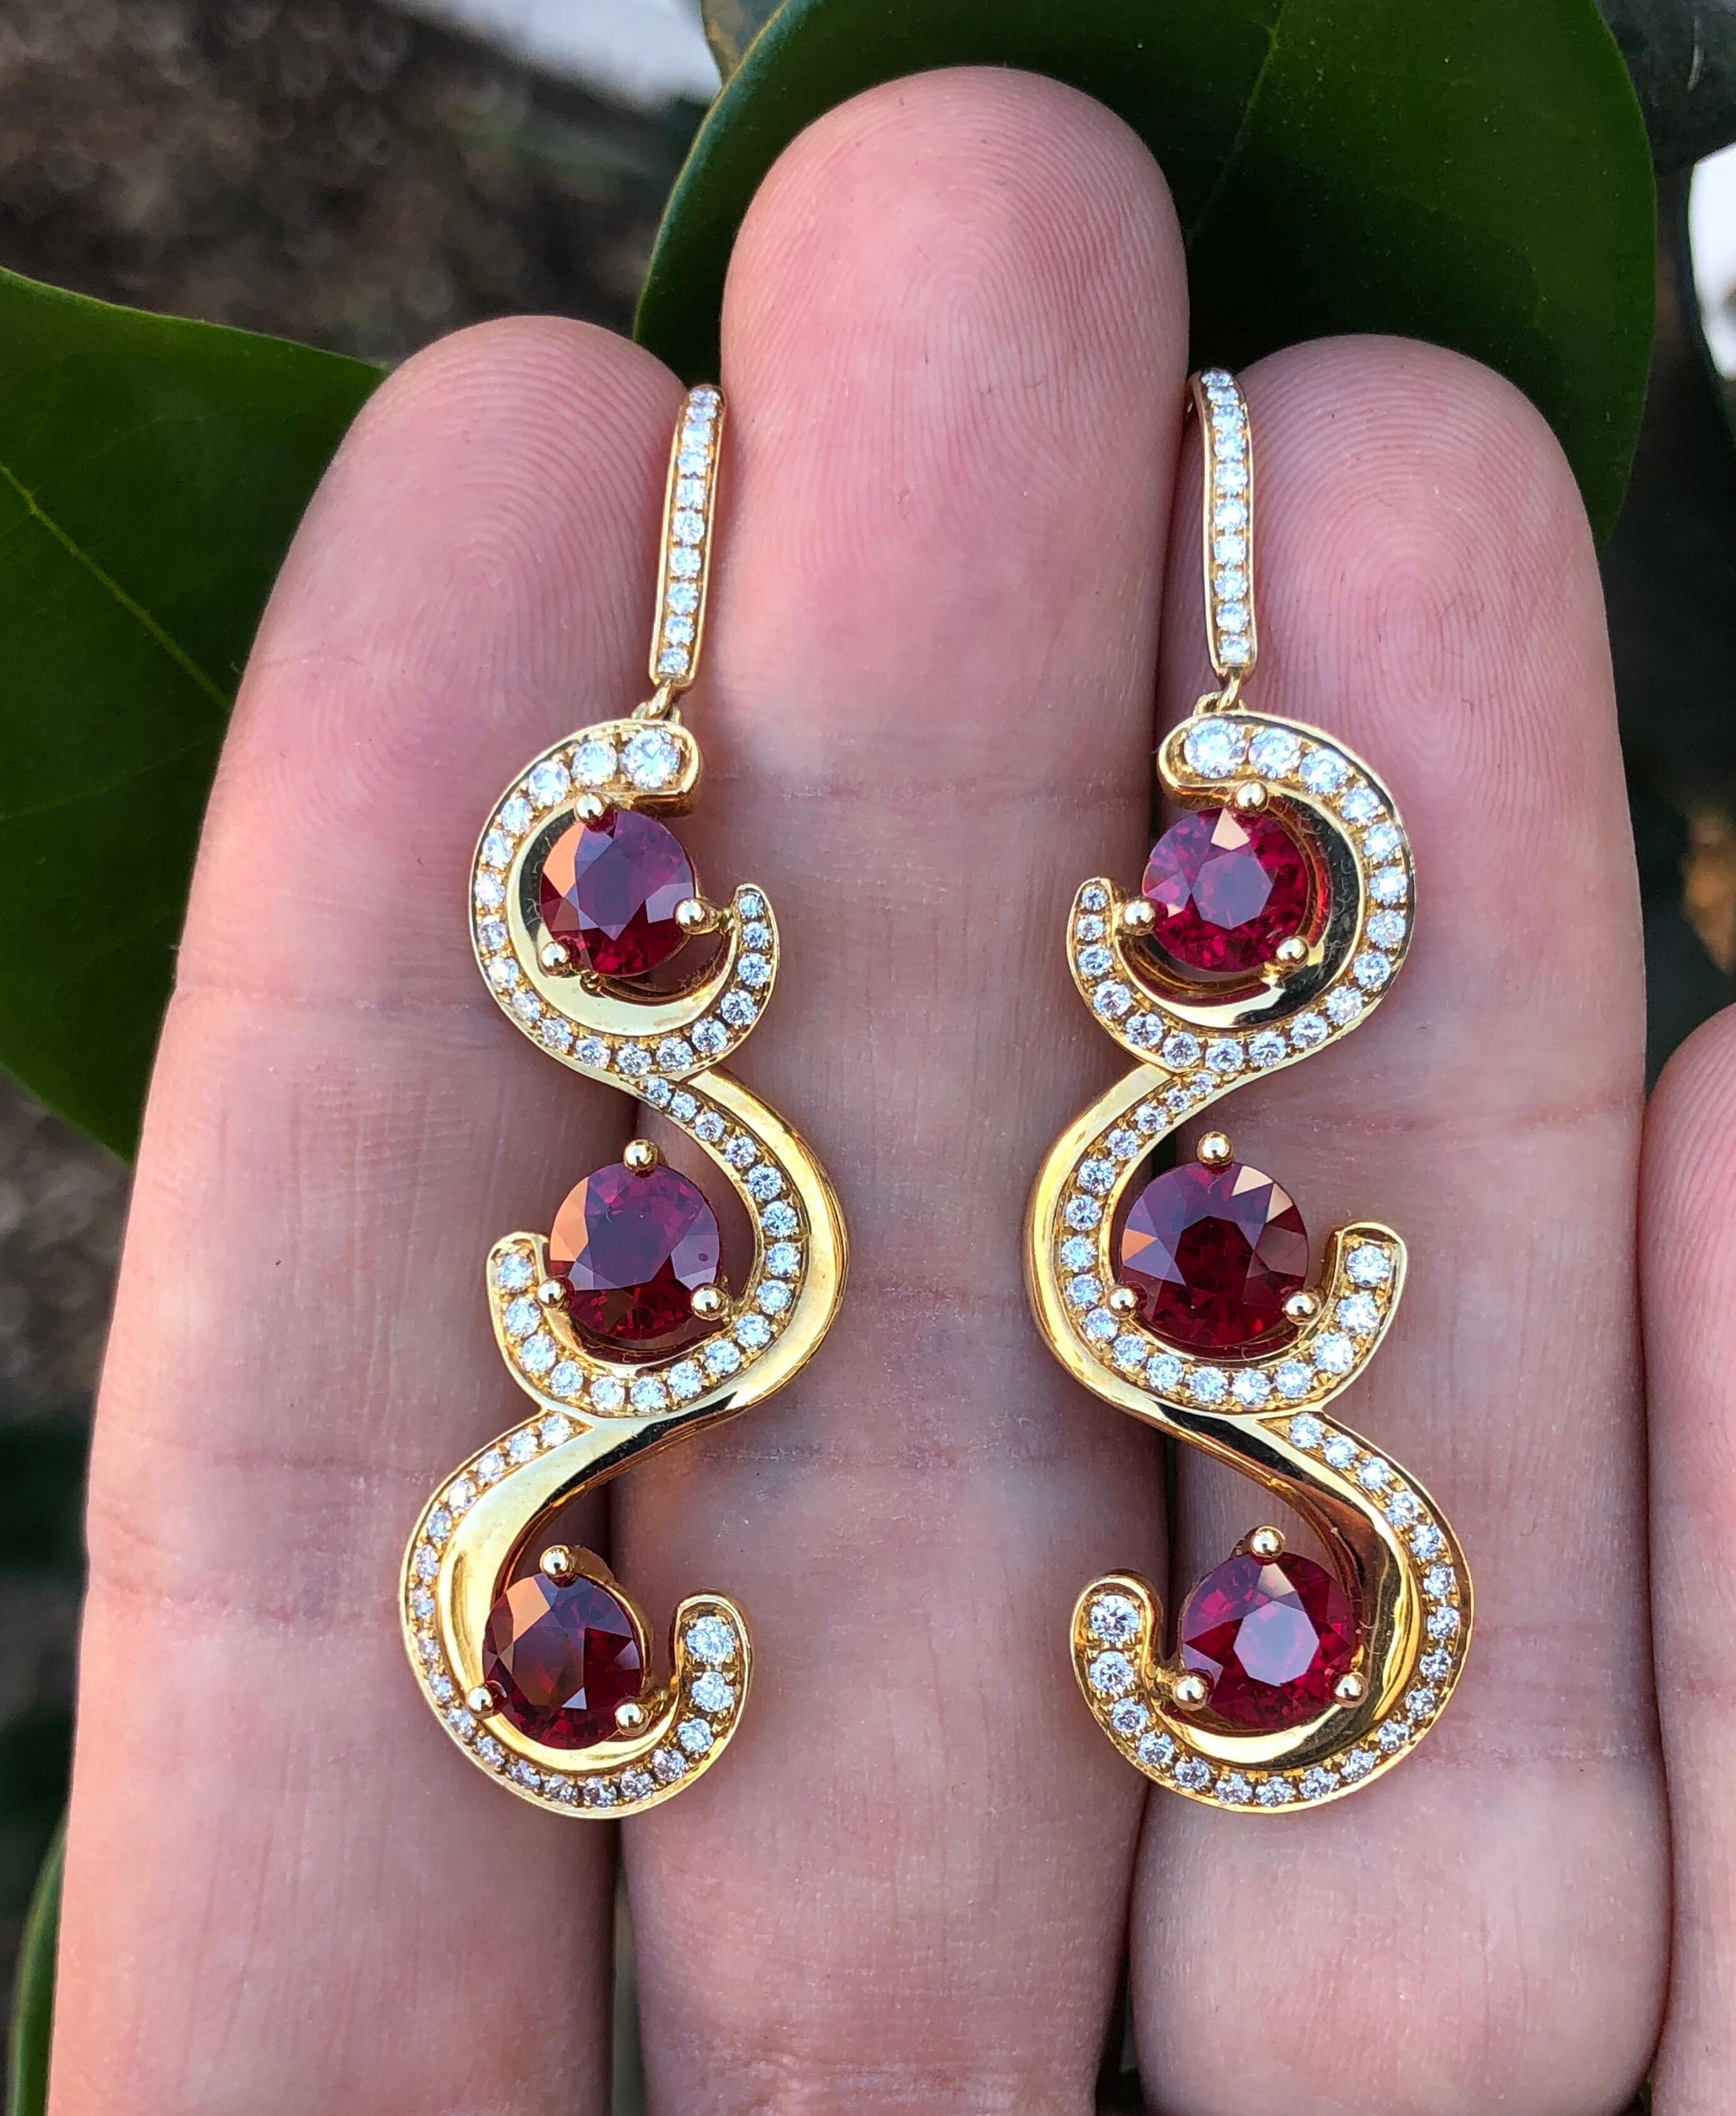 Ultra fine 7.19 carats total Burma Ruby rounds, and a total of 1.10 carat round brilliant diamonds are hand set in these spectacular 18K yellow gold earrings. 
Total length - 2 inches
Returns are accepted and paid by us within 7 days of